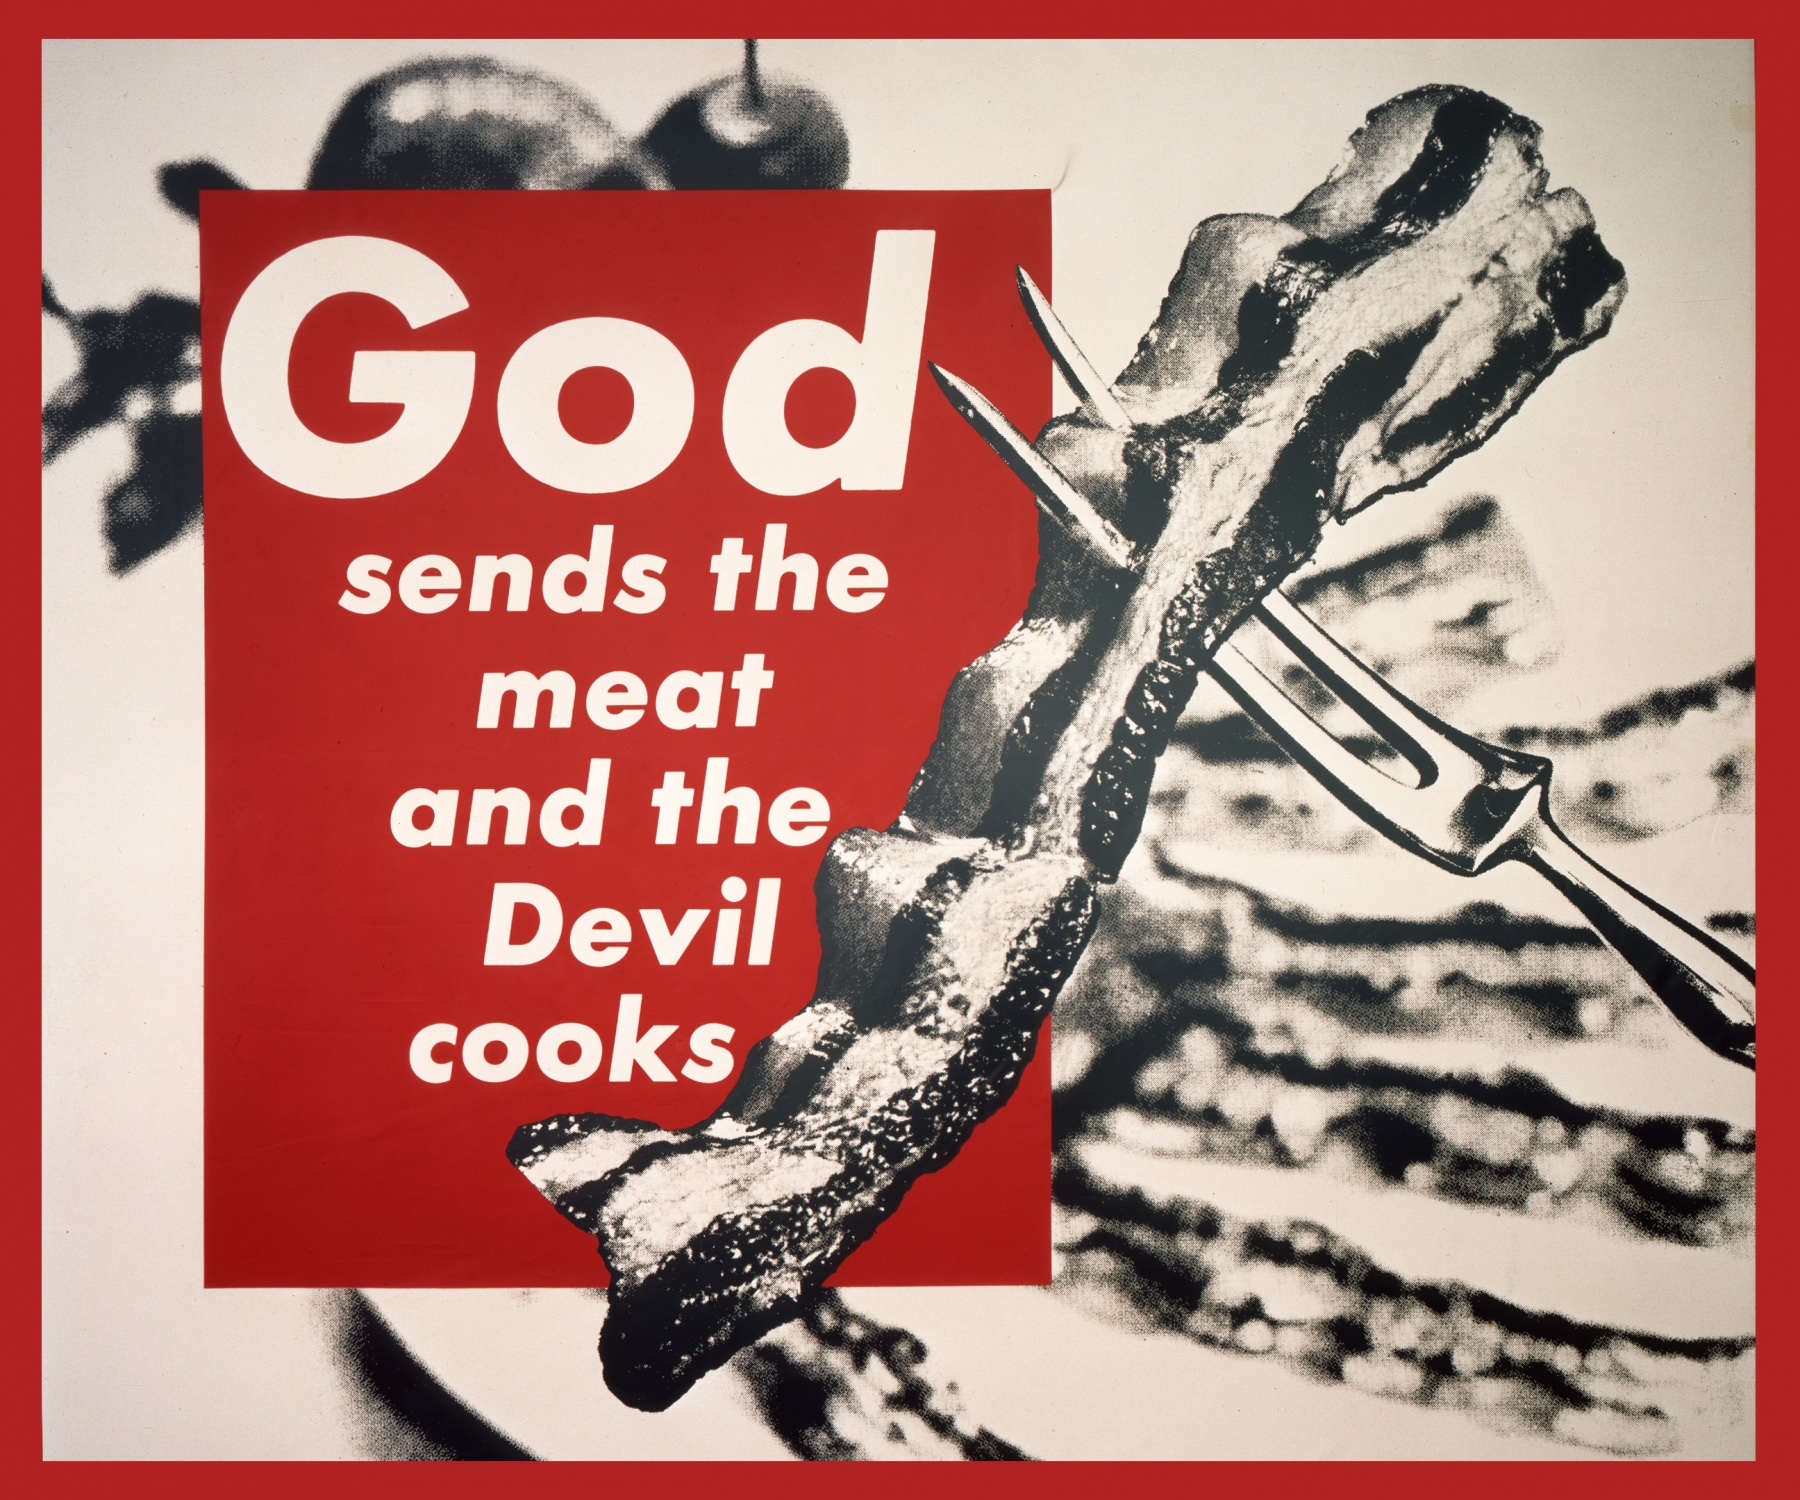 Barbara Kruger

Untitled (God Sends the Meat and the Devil Cooks), 1988

photographic silkscreen on vinyl

111 x 131 1/2 in.

The collection of Alain Servais

Courtesy: the artist

&nbsp;